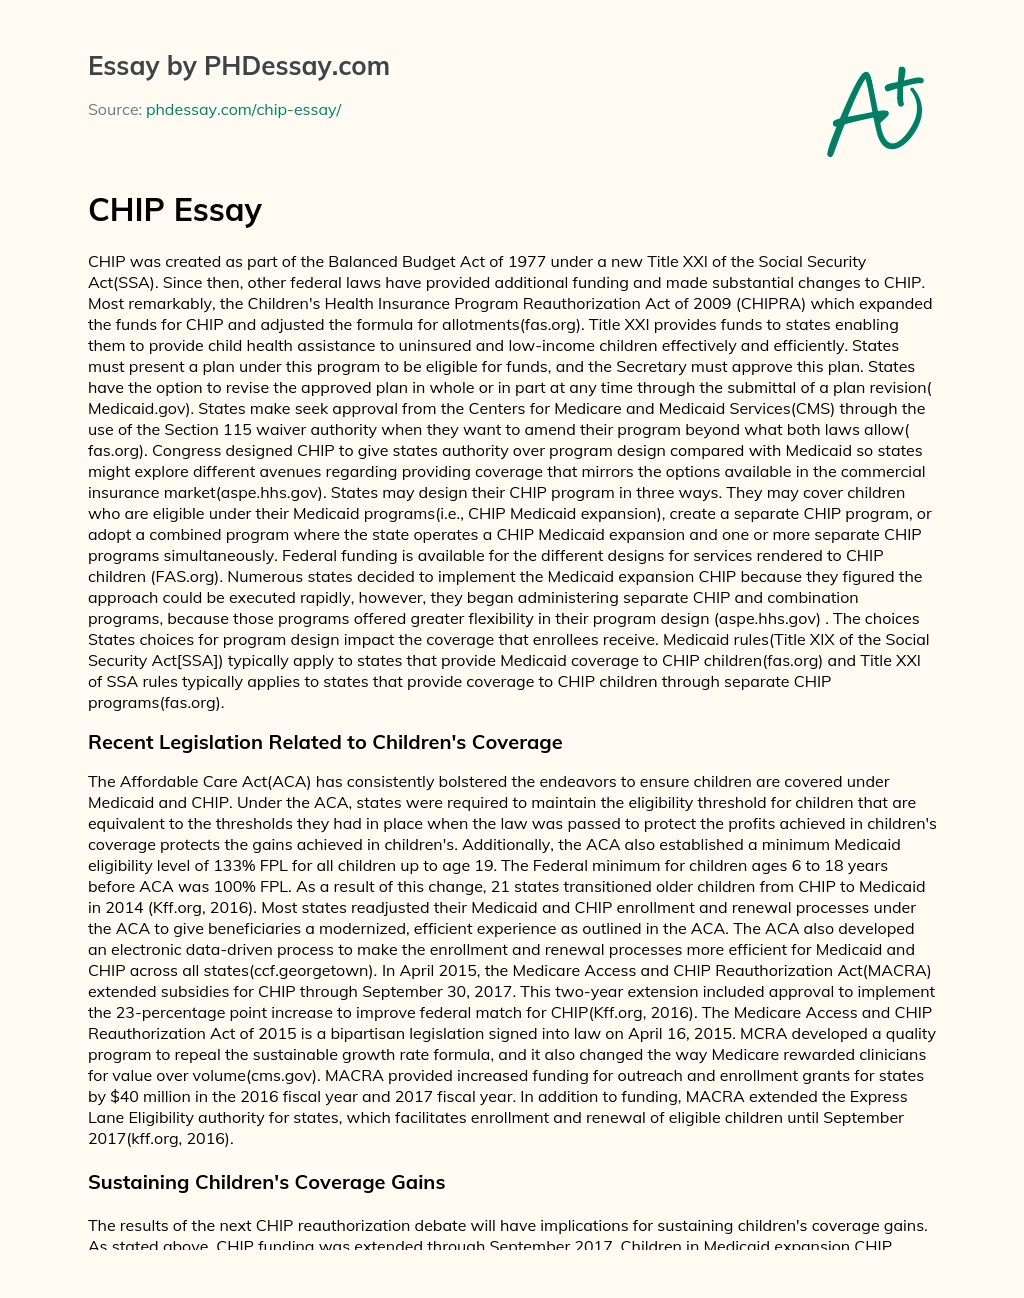 The Children’s Health Insurance Program (CHIP) and its Funding and Regulations essay